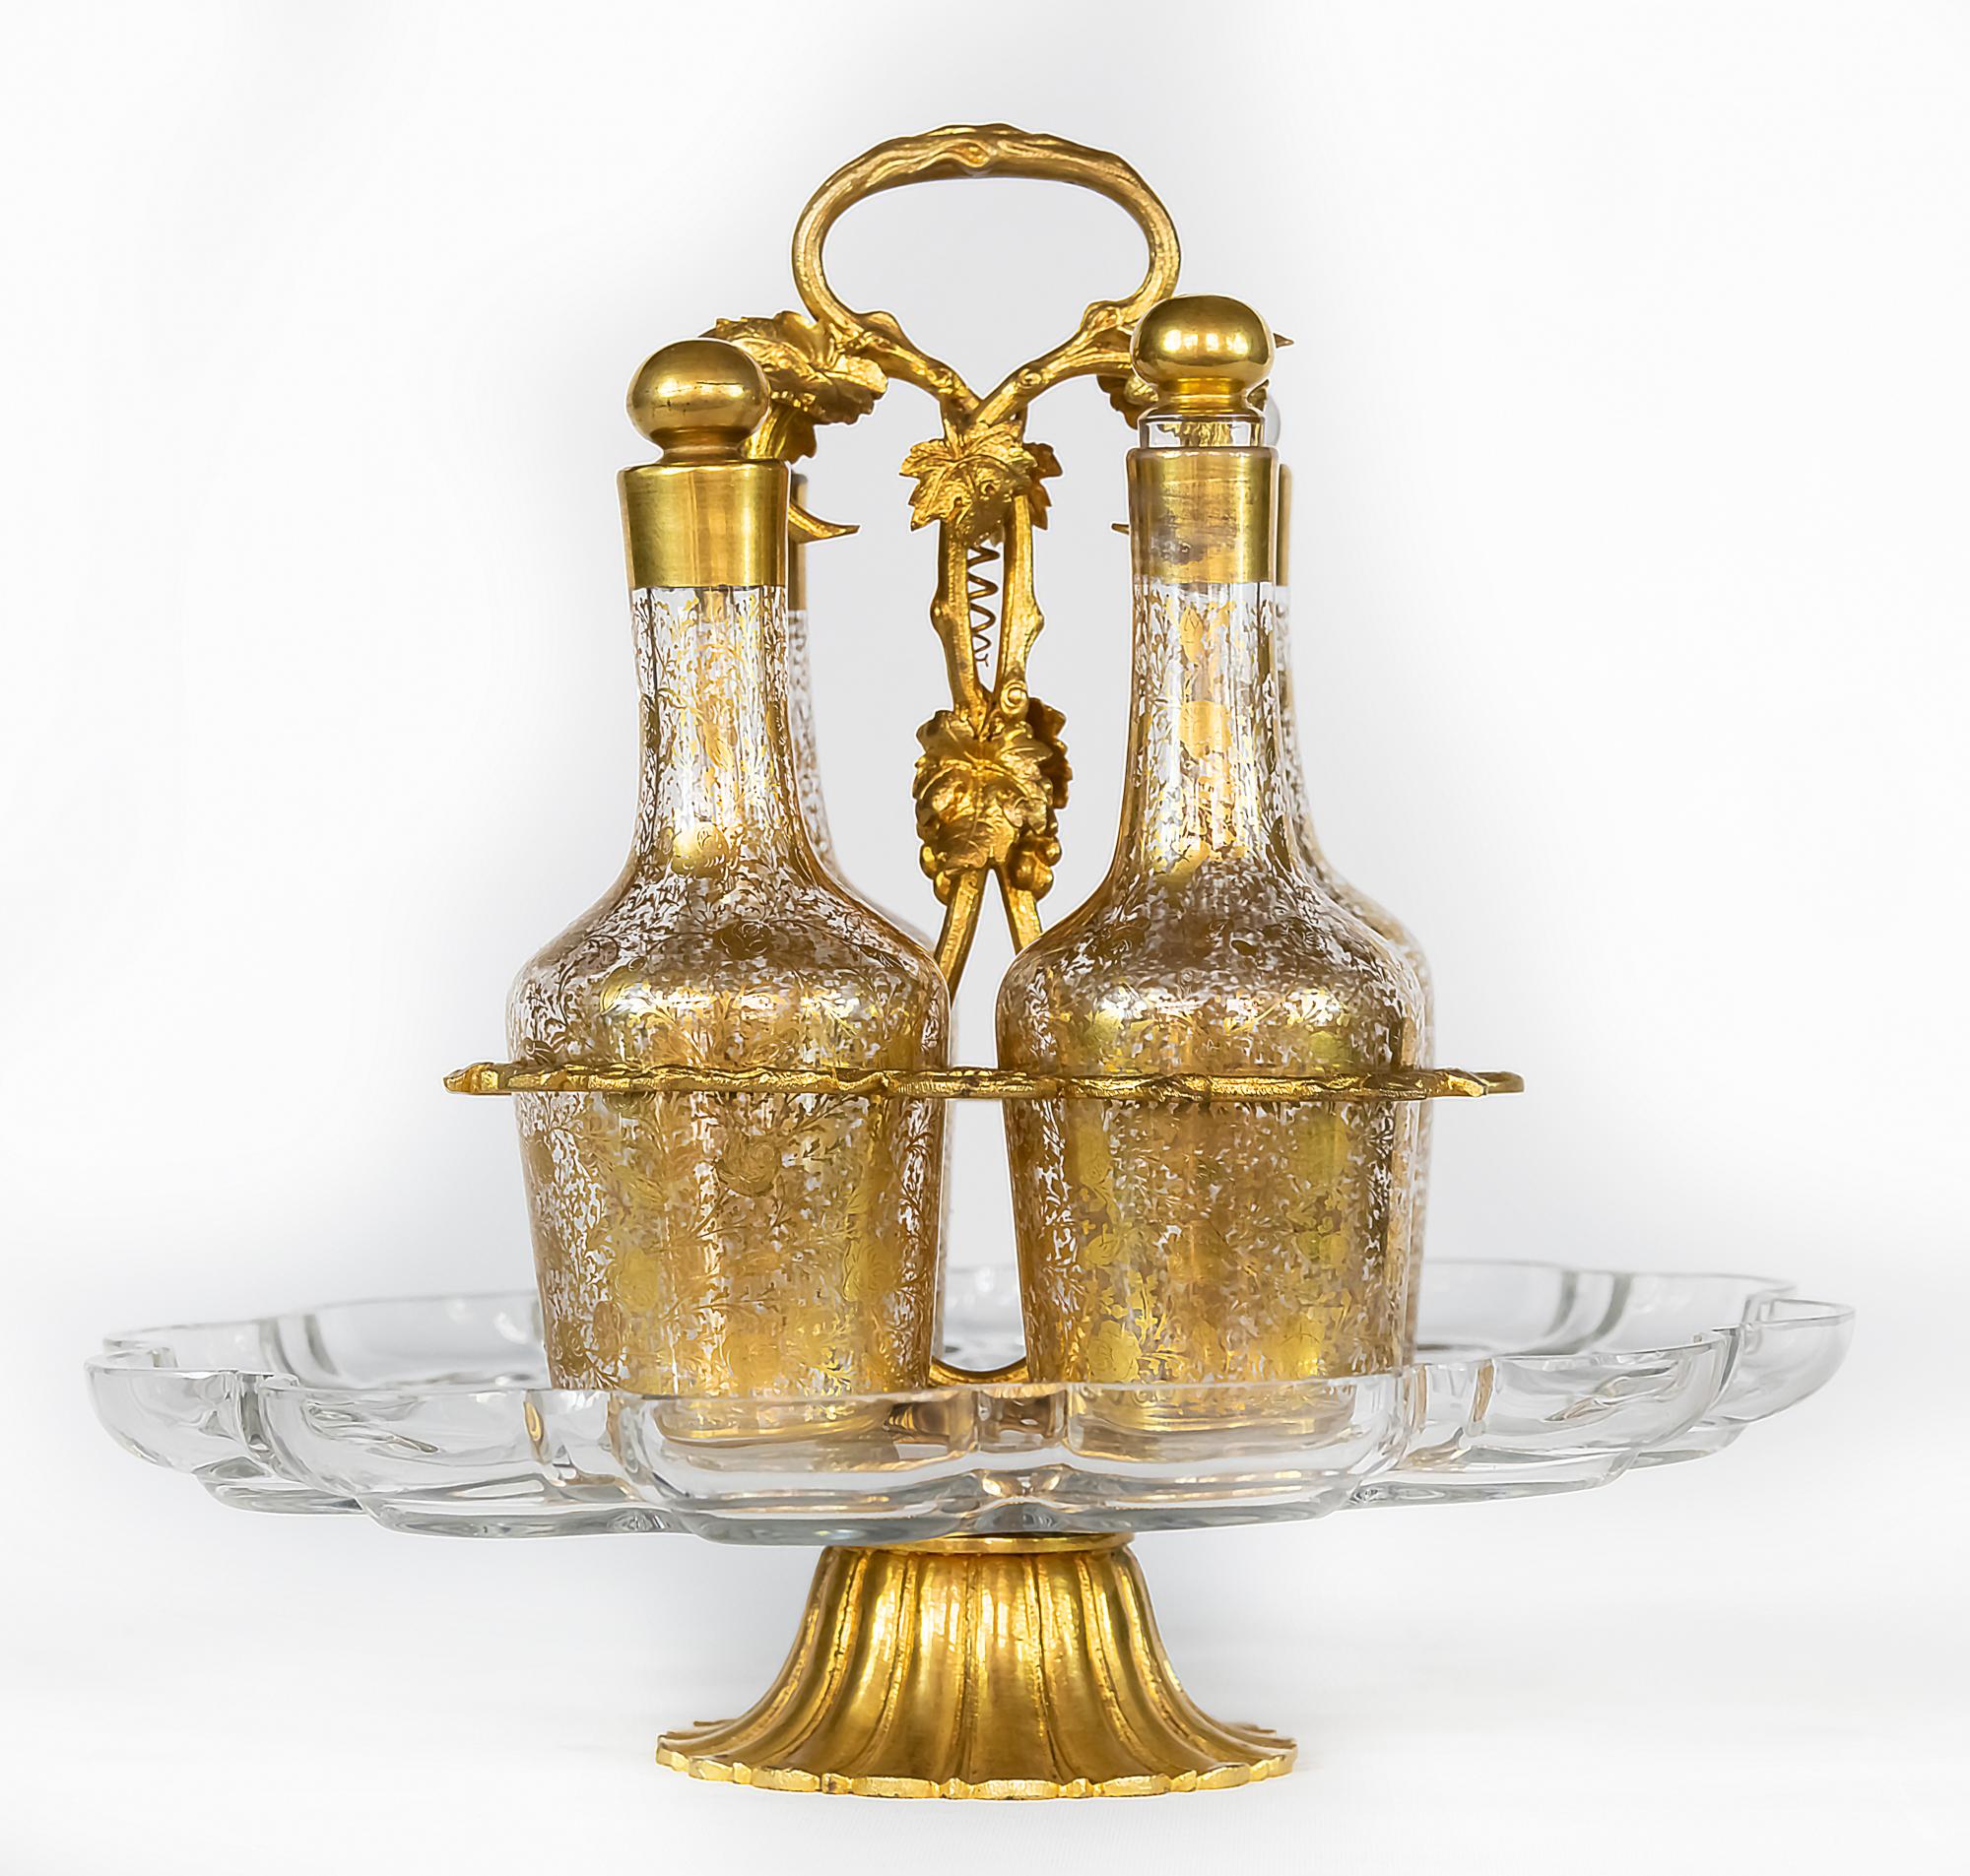 Antique French liqueur crystal and gilt bronze stand carousell carafe/decanter set.
The bronze holder is decorated with leaf elements and completed with crystal tray including 4 pcs. of crystal carafes.
Very good antique condition.